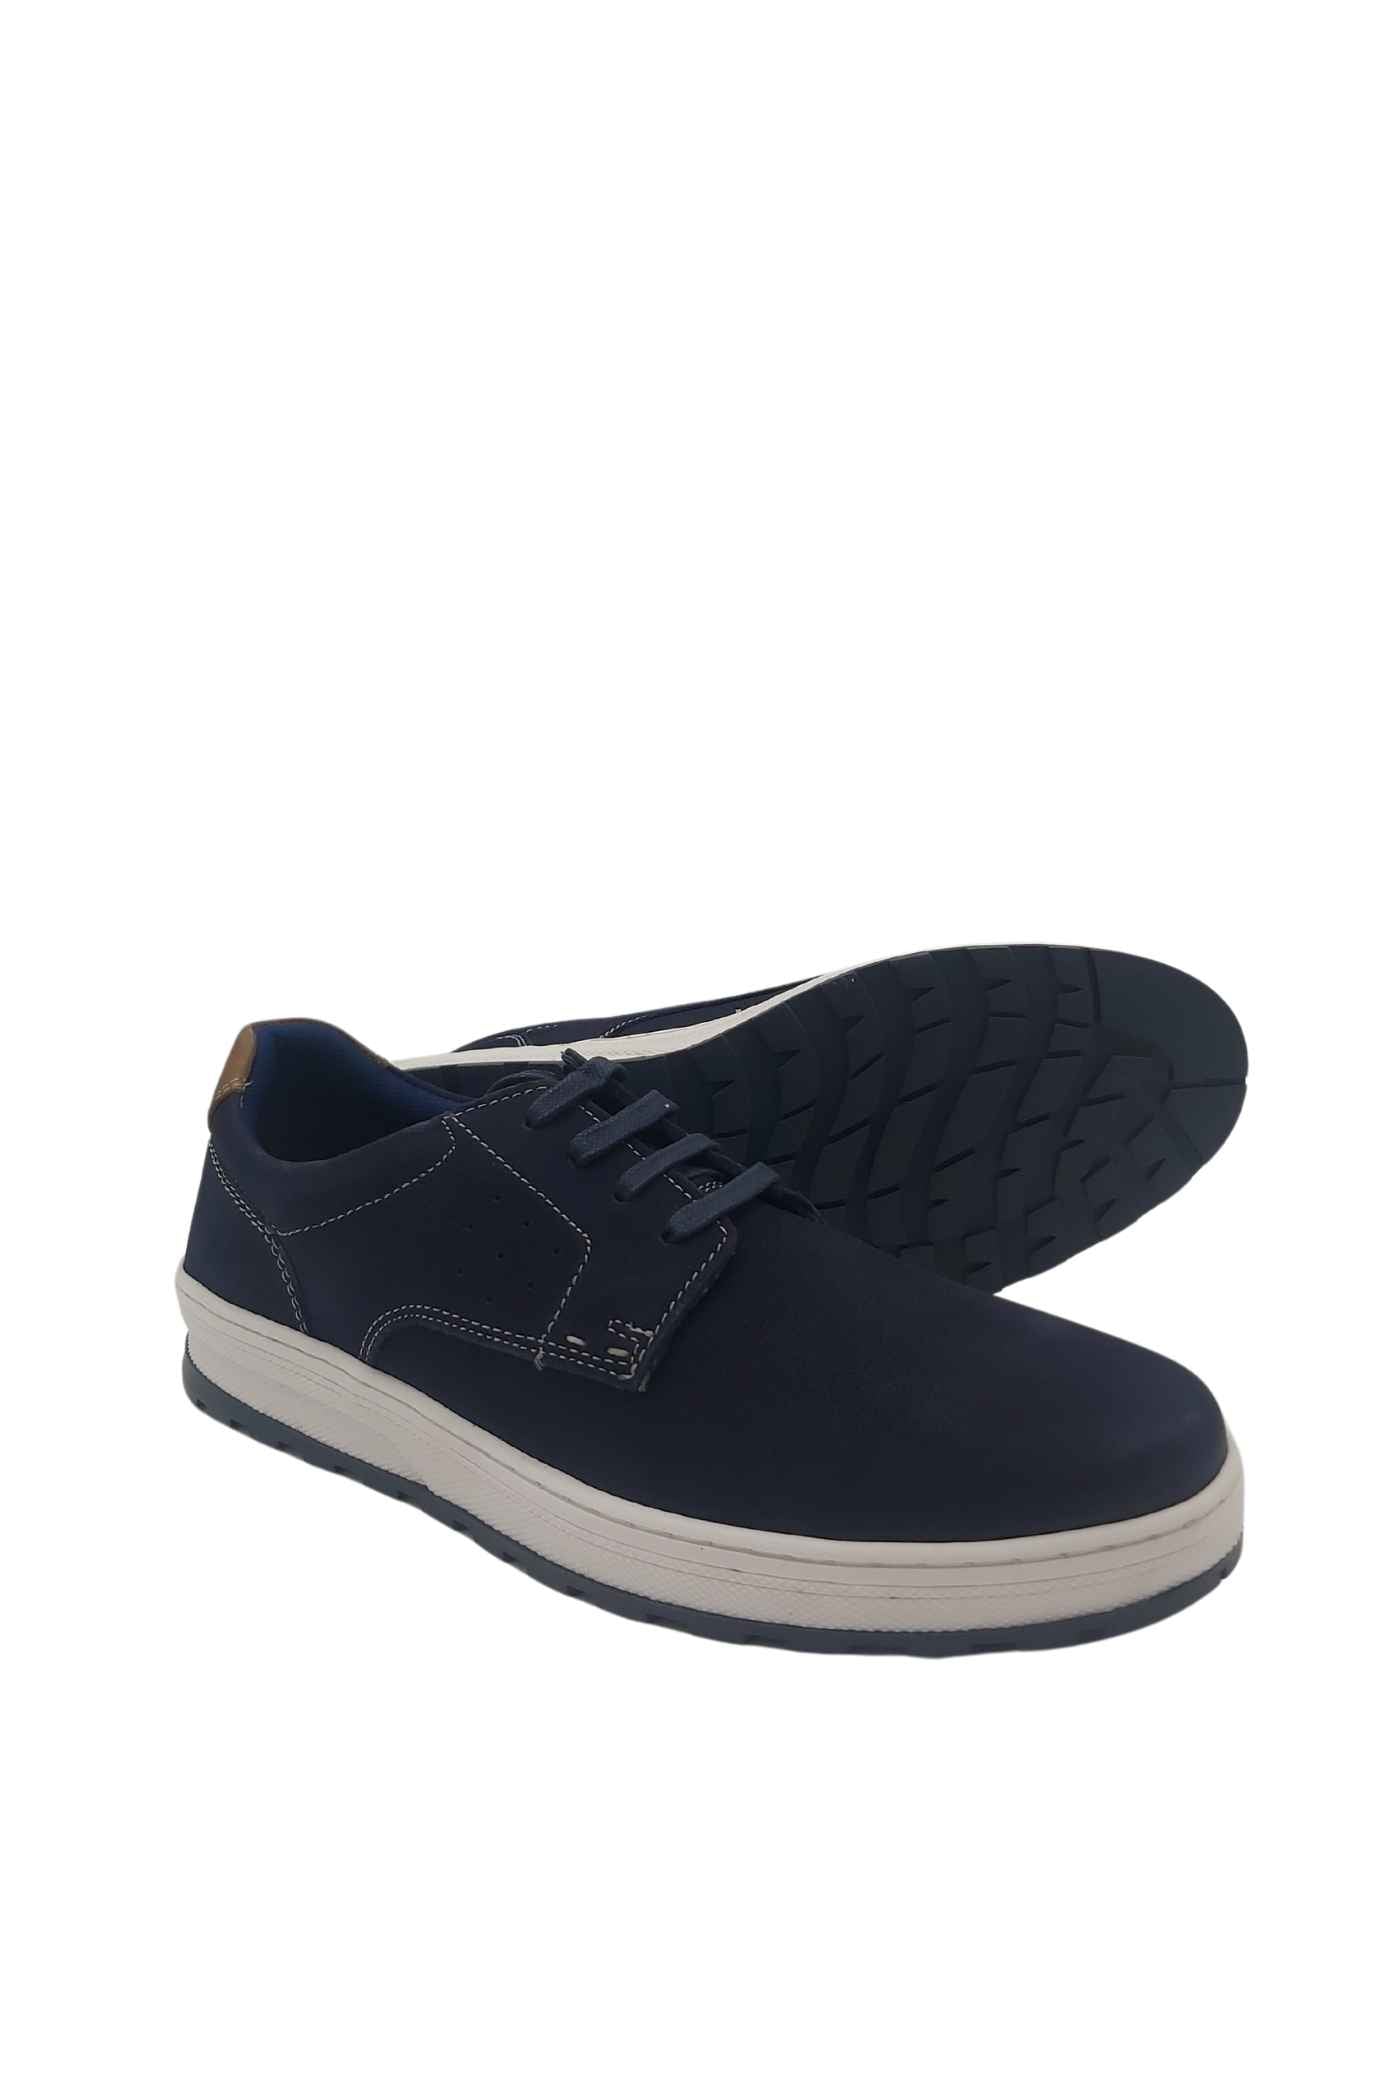 Men's Daly Navy Smart Casual Shoe-Sole View